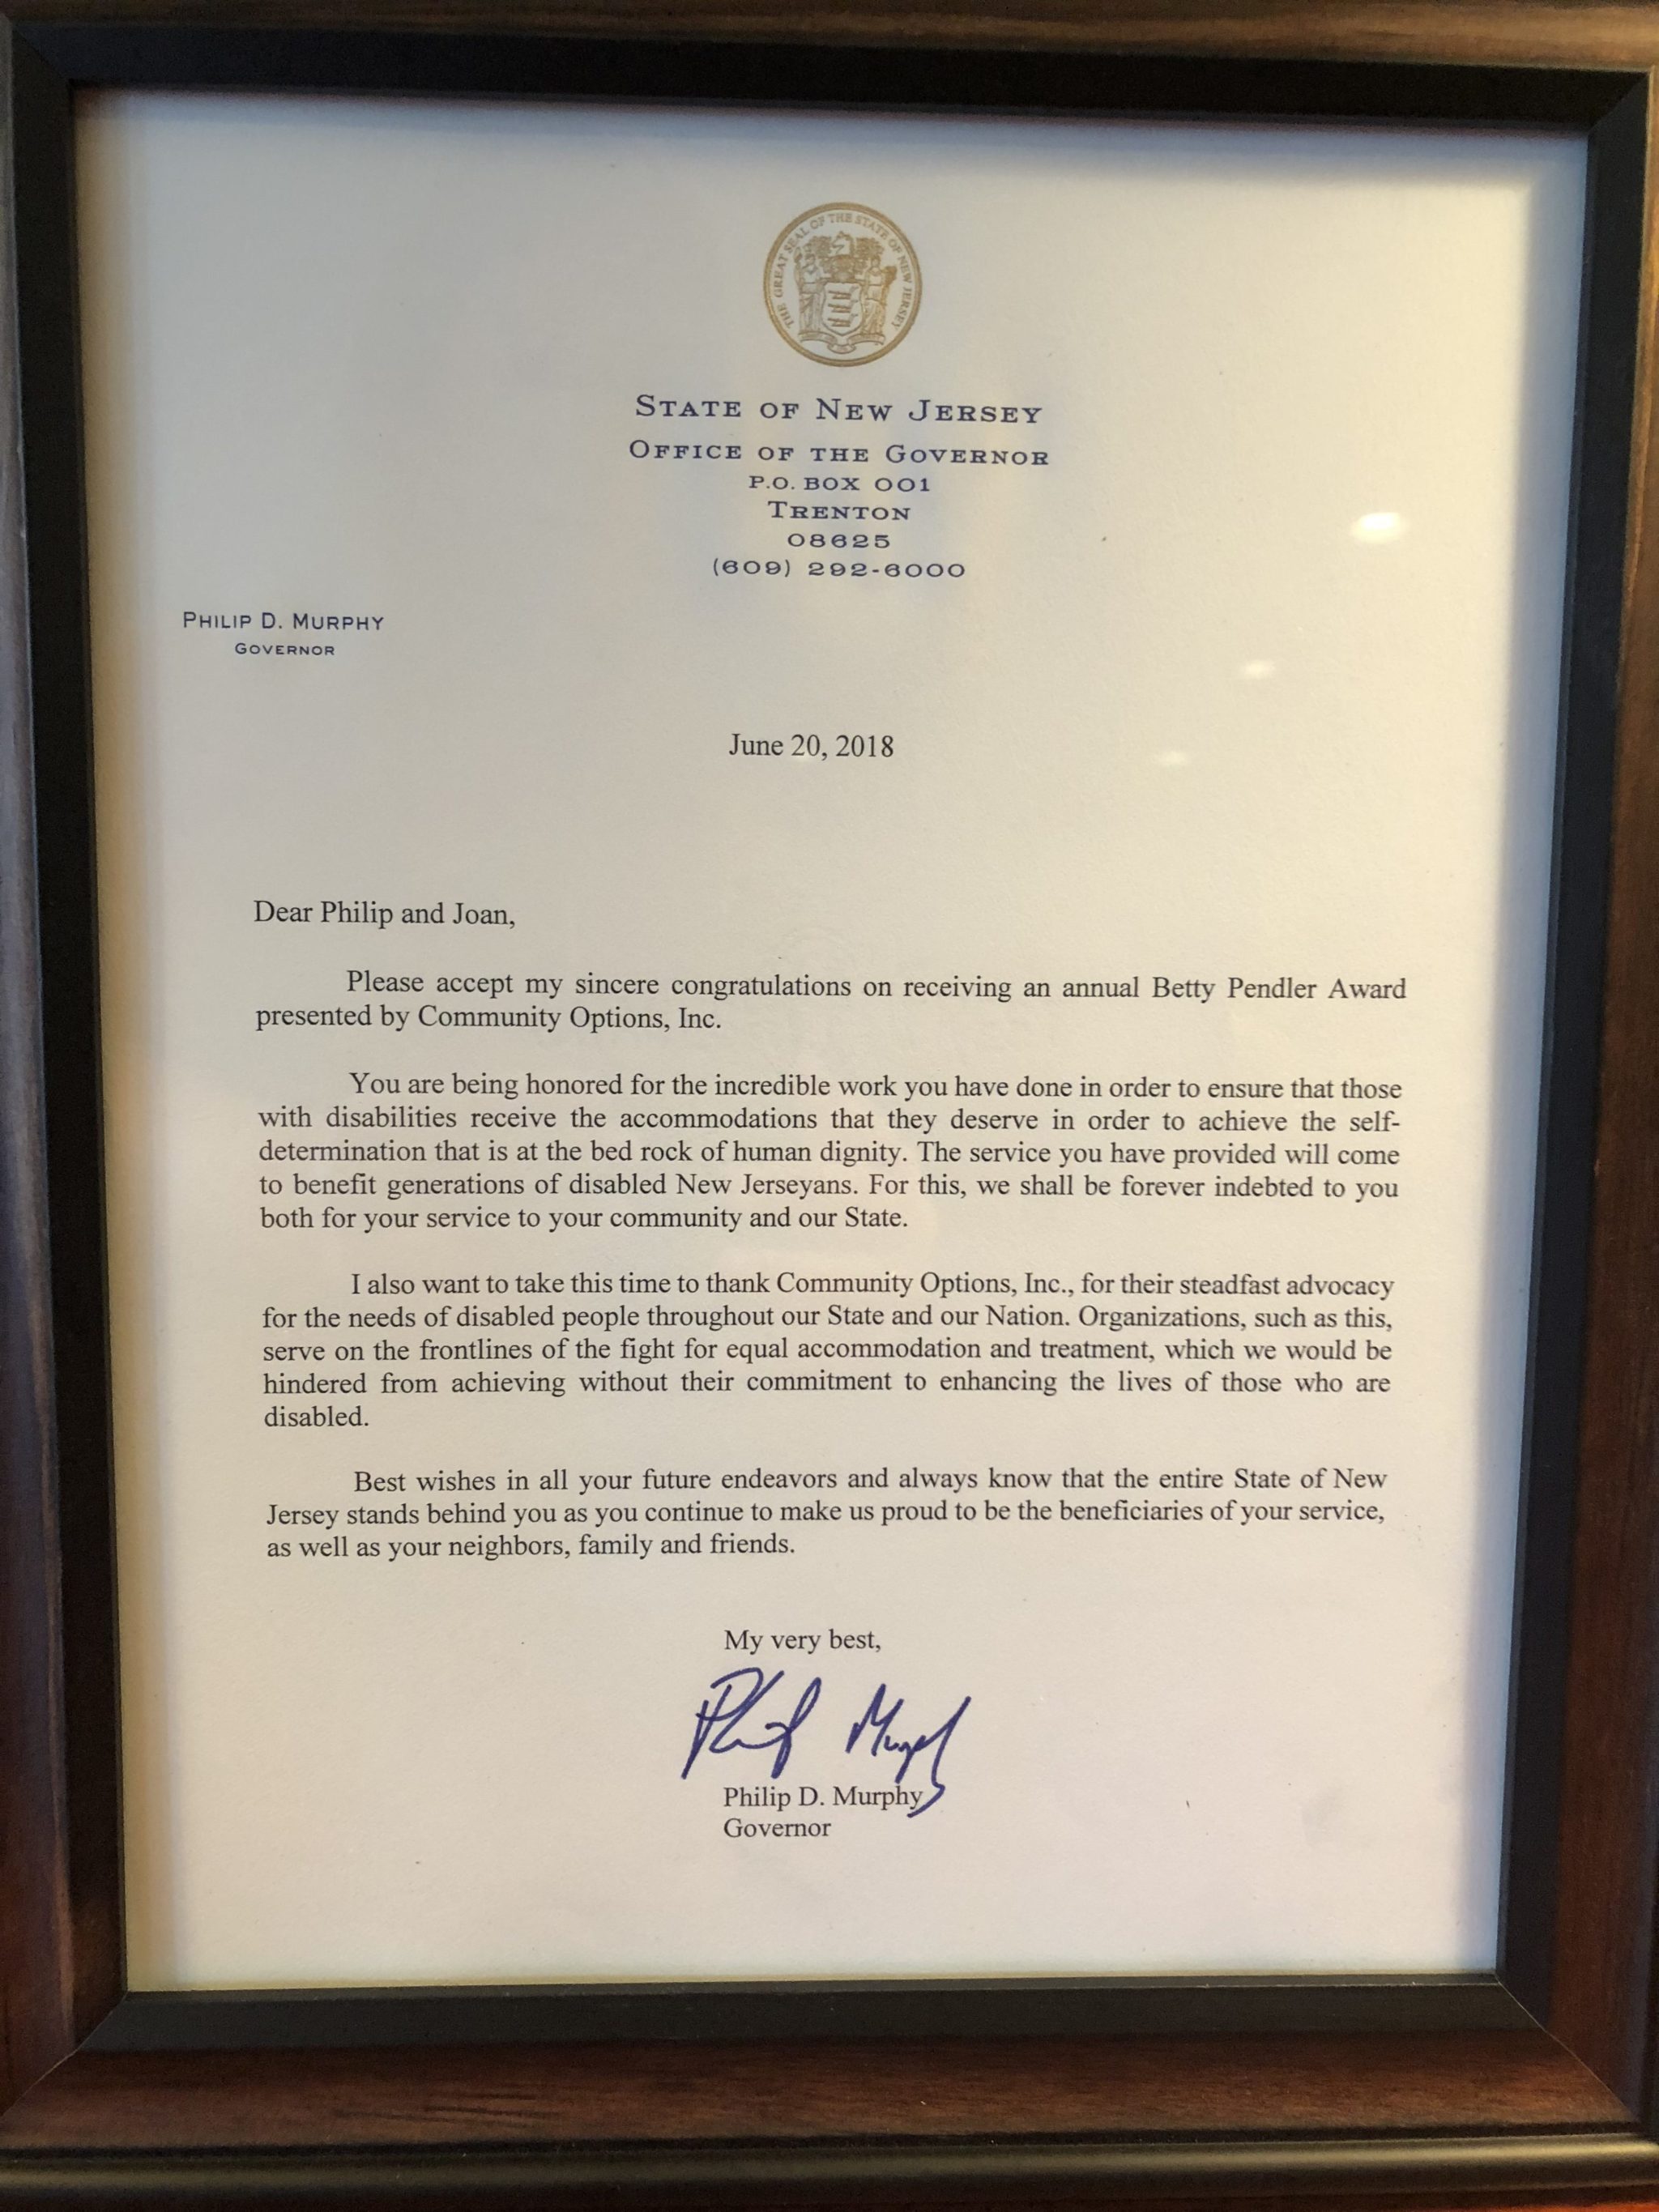 A letter from Governor Murphy congratulating Philip Lian and Joan Mueller on winning the Betty Pendler Award, which recognizes leadership and philanthropy on behalf of people with disabilities. Each year, the award is given to those who exemplify the mission of Community Options and demonstrate their commitment to ensuring that people with disabilities live their best lives in communities of their choosing.